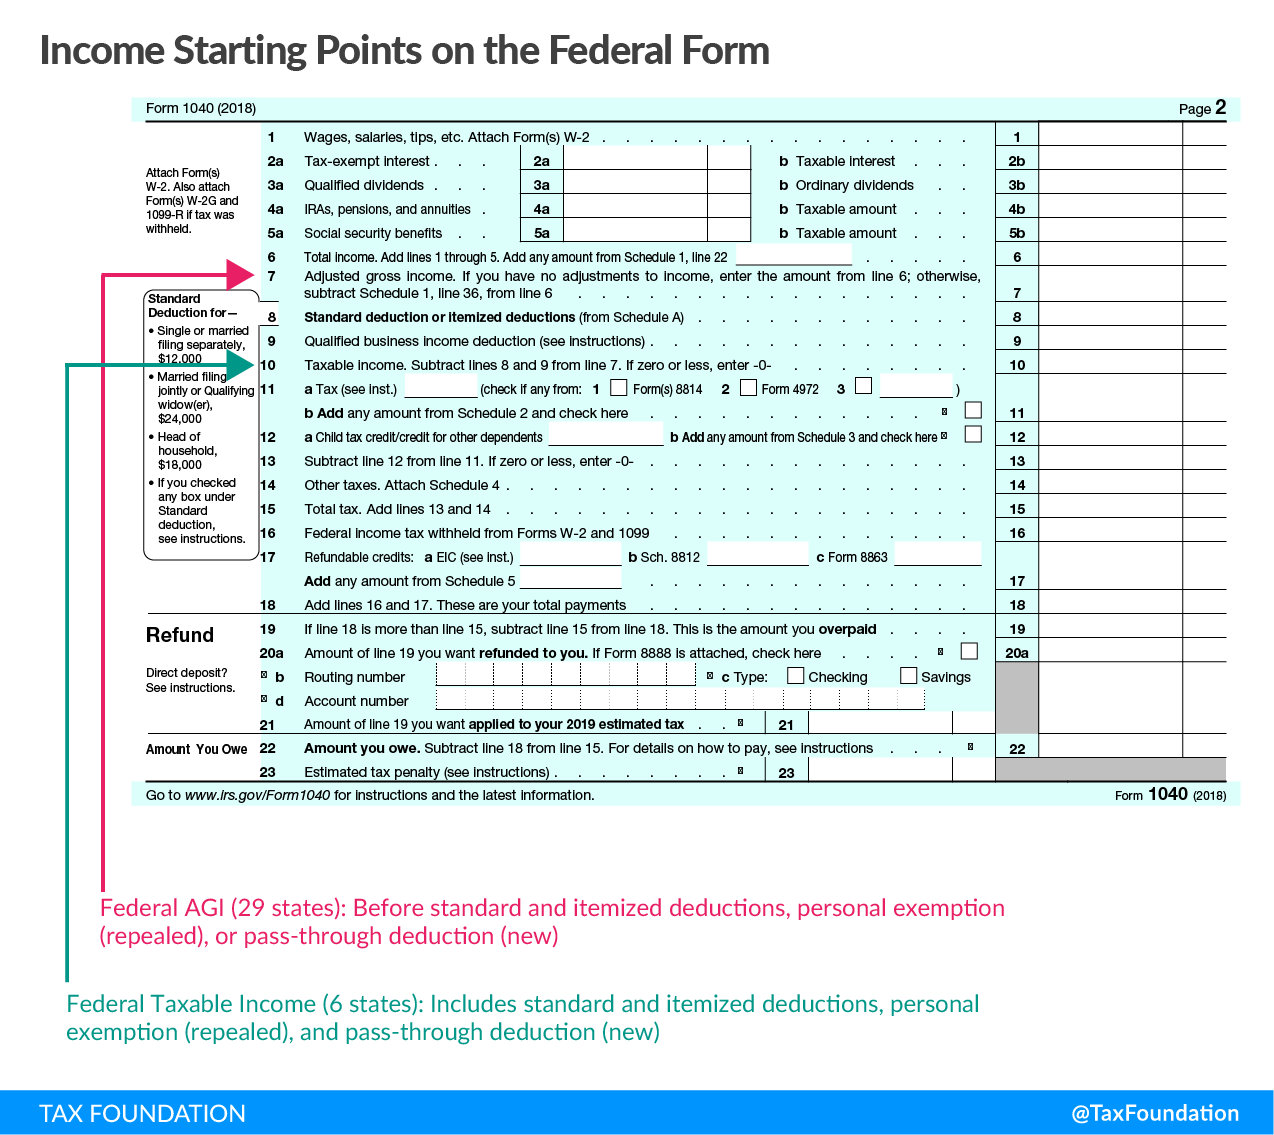 Income Tax Starting Points on the Federal Form